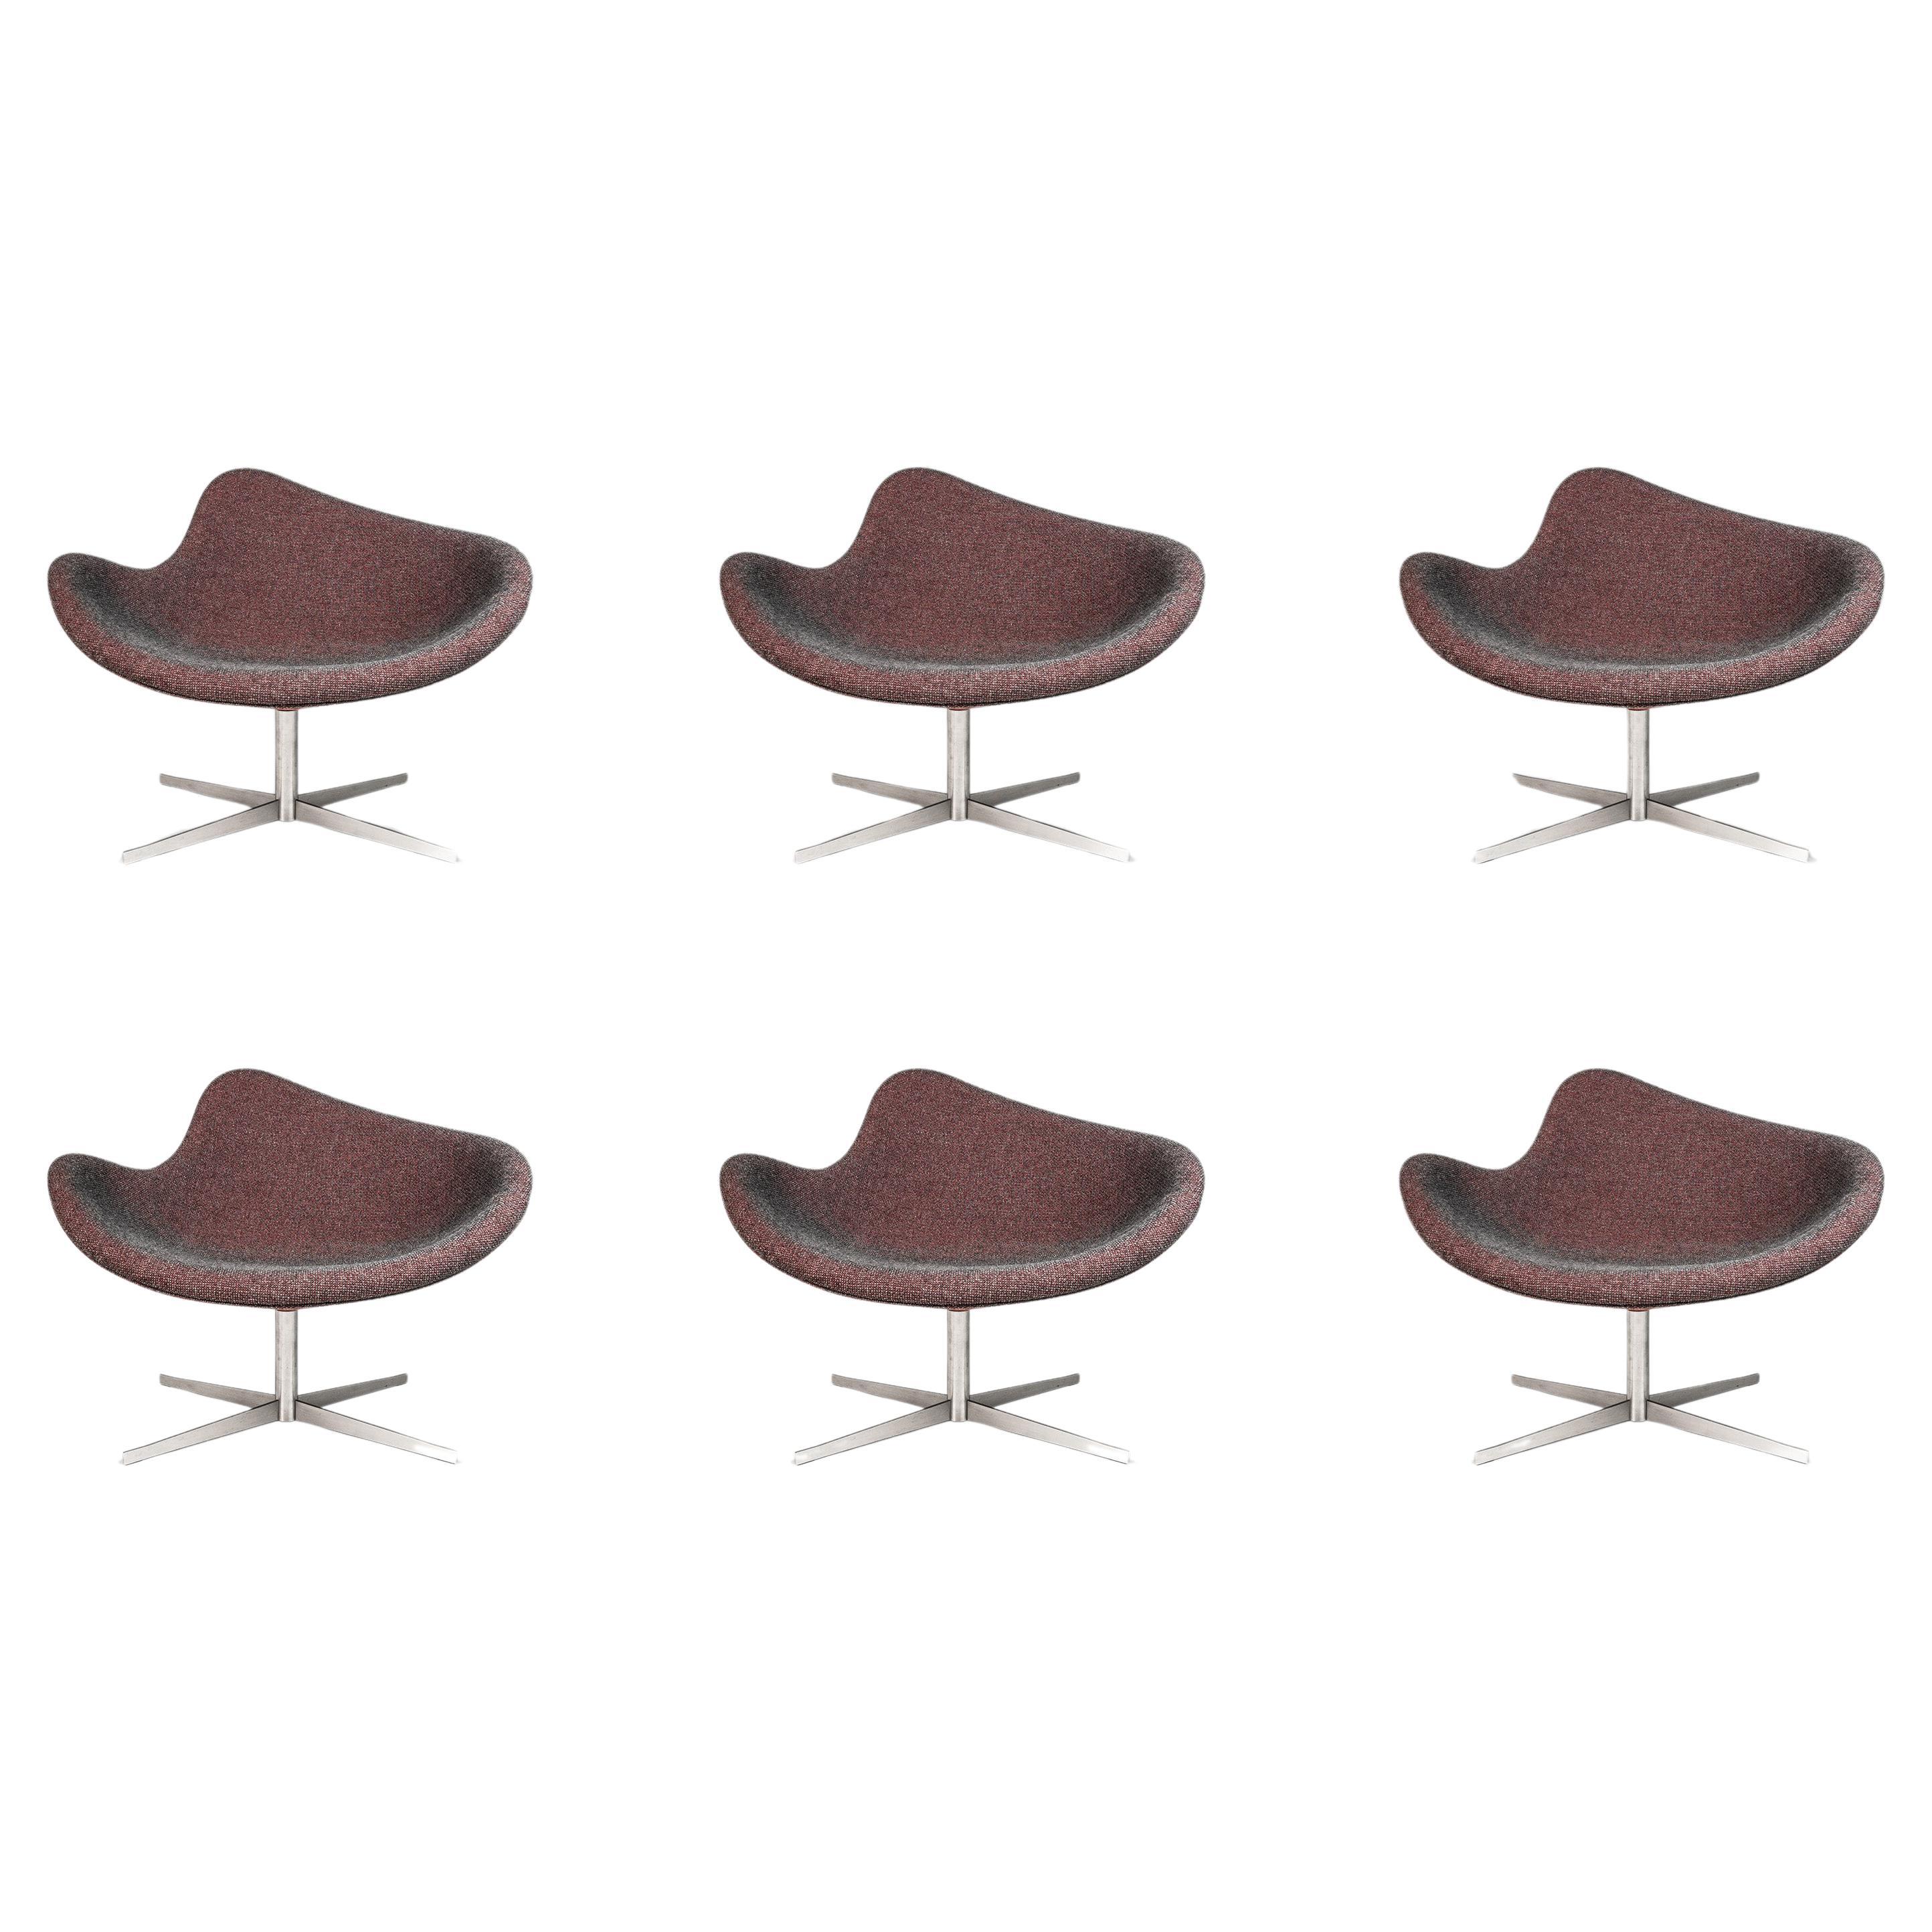 Set of 6 Postmodern Swivel "K2" Magenta Chairs by Busk & Hertzog, USA, c. 2000's For Sale